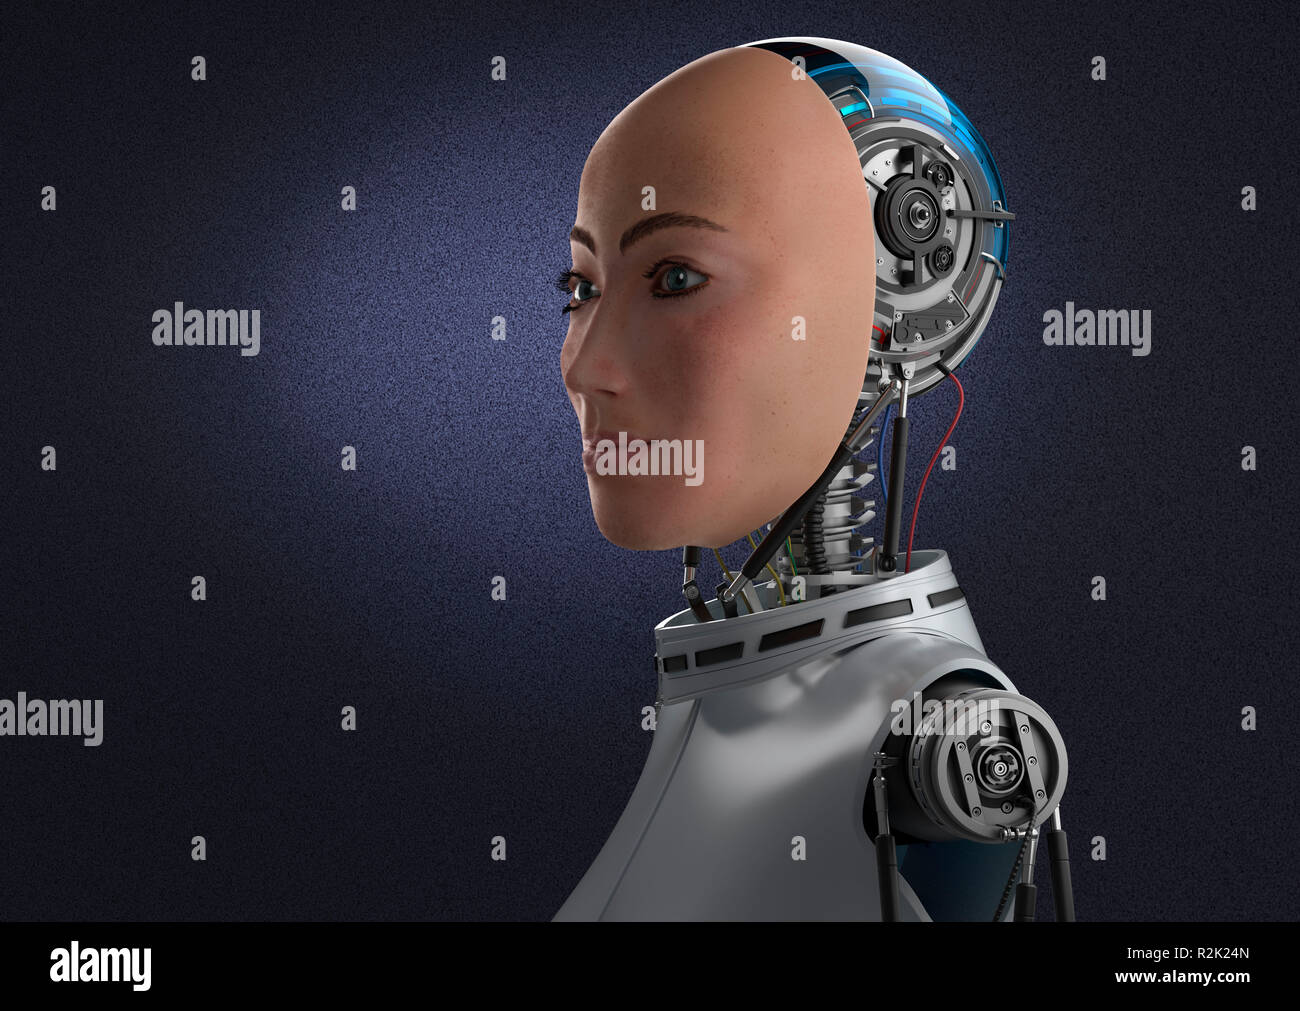 Female robot Android with realistic face, mechanical back of the head and upper body. Half-close-up side view, against dark purple background. Stock Photo